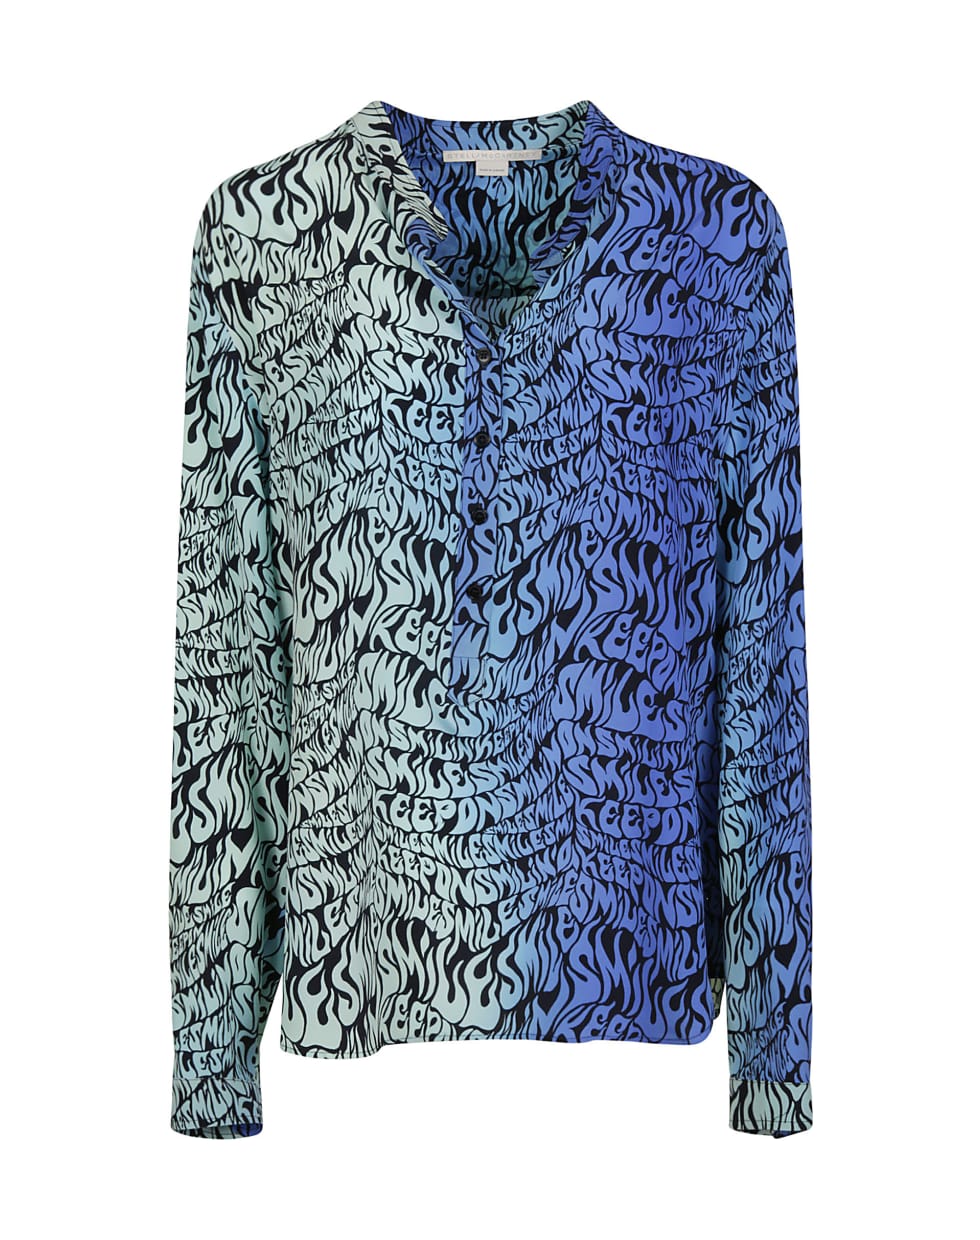 Stella McCartney All-over Printed Button Placket Shirt | italist